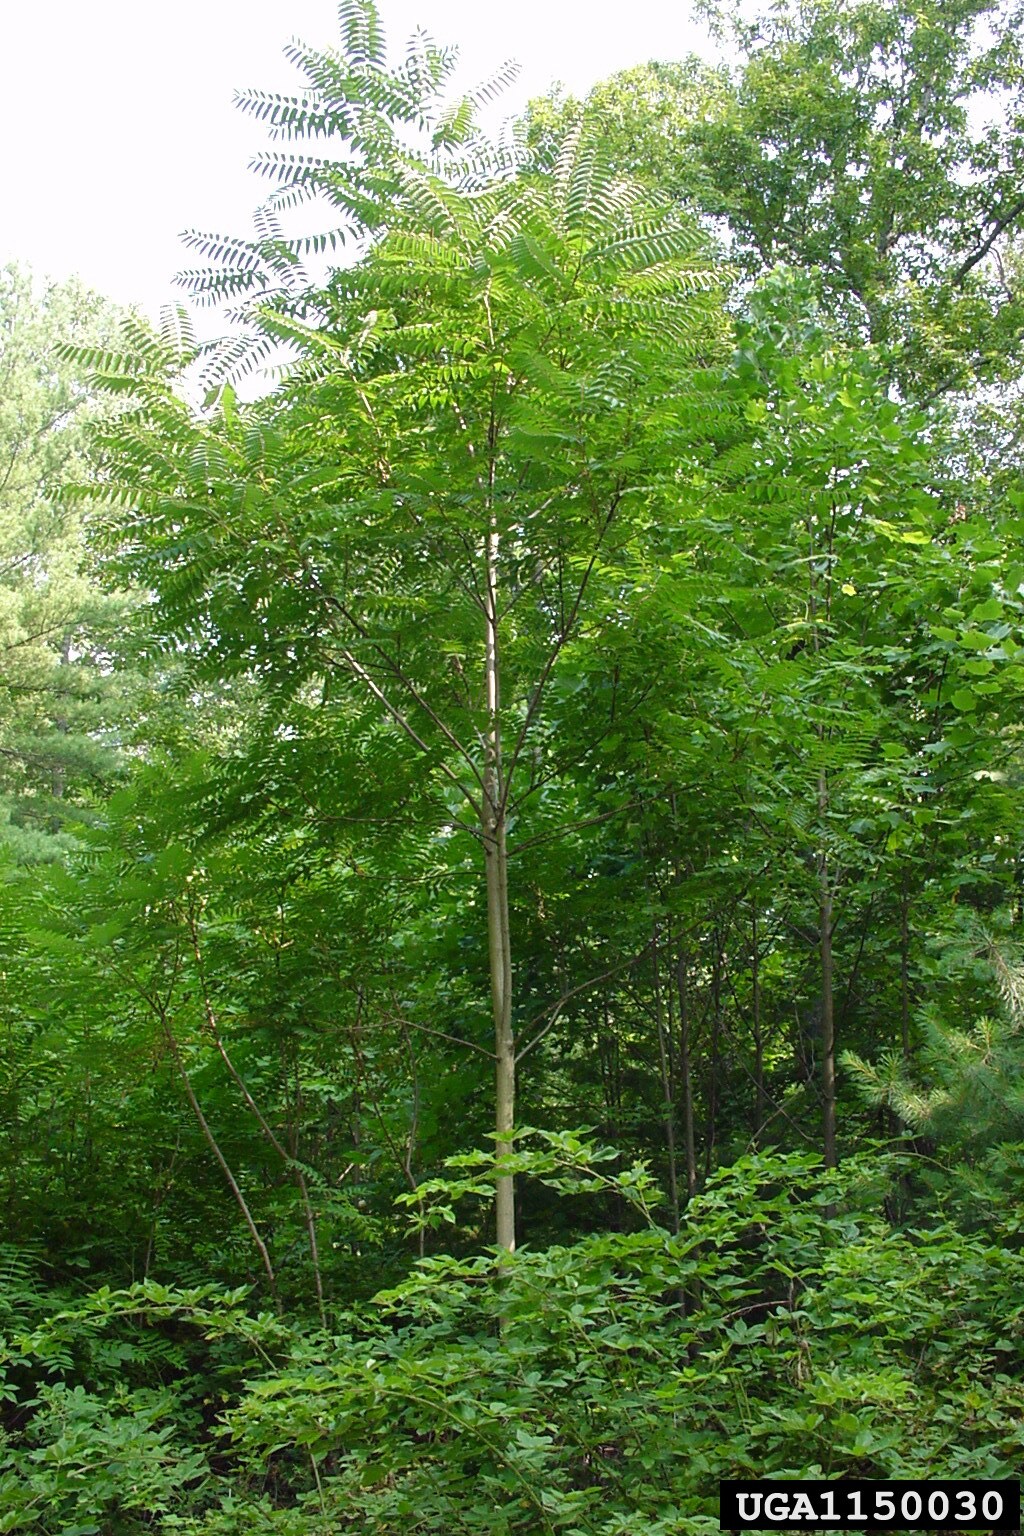 Tree of heaven, an invasive plant that outcompetes native species. 